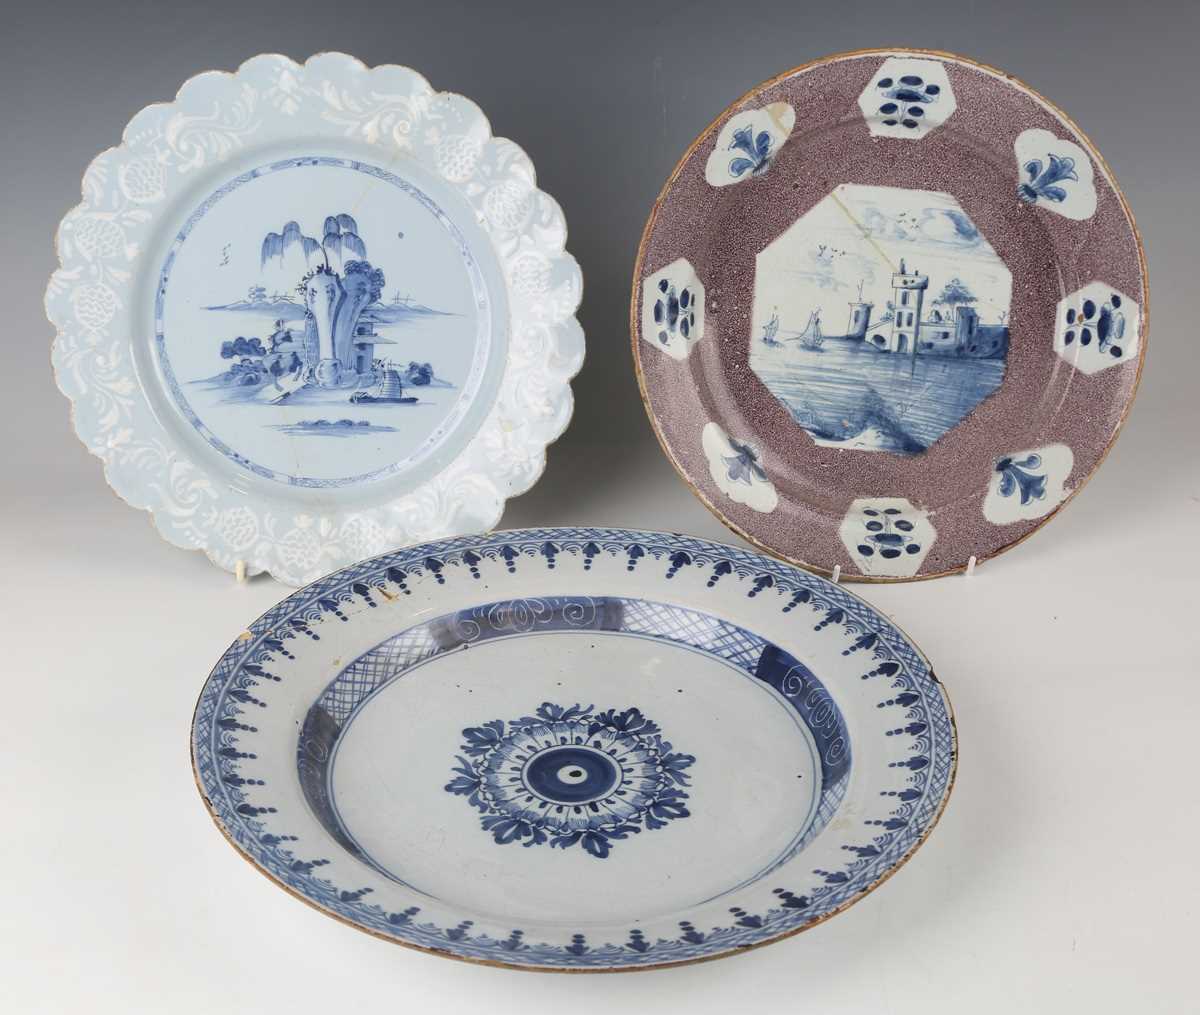 A manganese powdered ground delft dish, Bristol or Wincanton, circa 1740, painted in blue with a